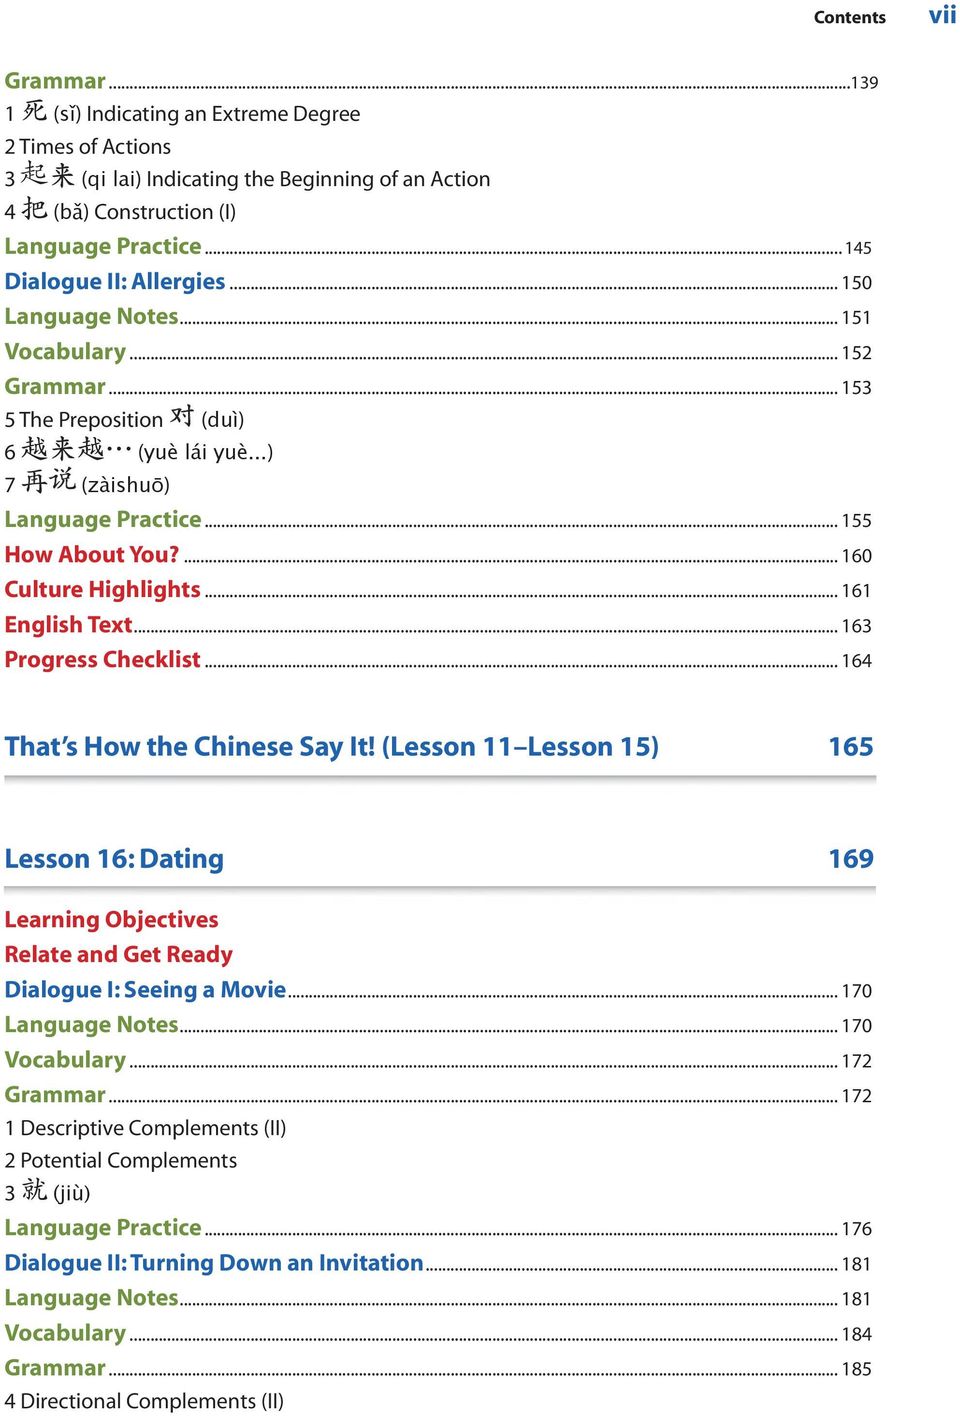 ... 160 Culture Highlights... 161 English Text... 163 Progress Checklist... 164 That s How the Chinese Say It!